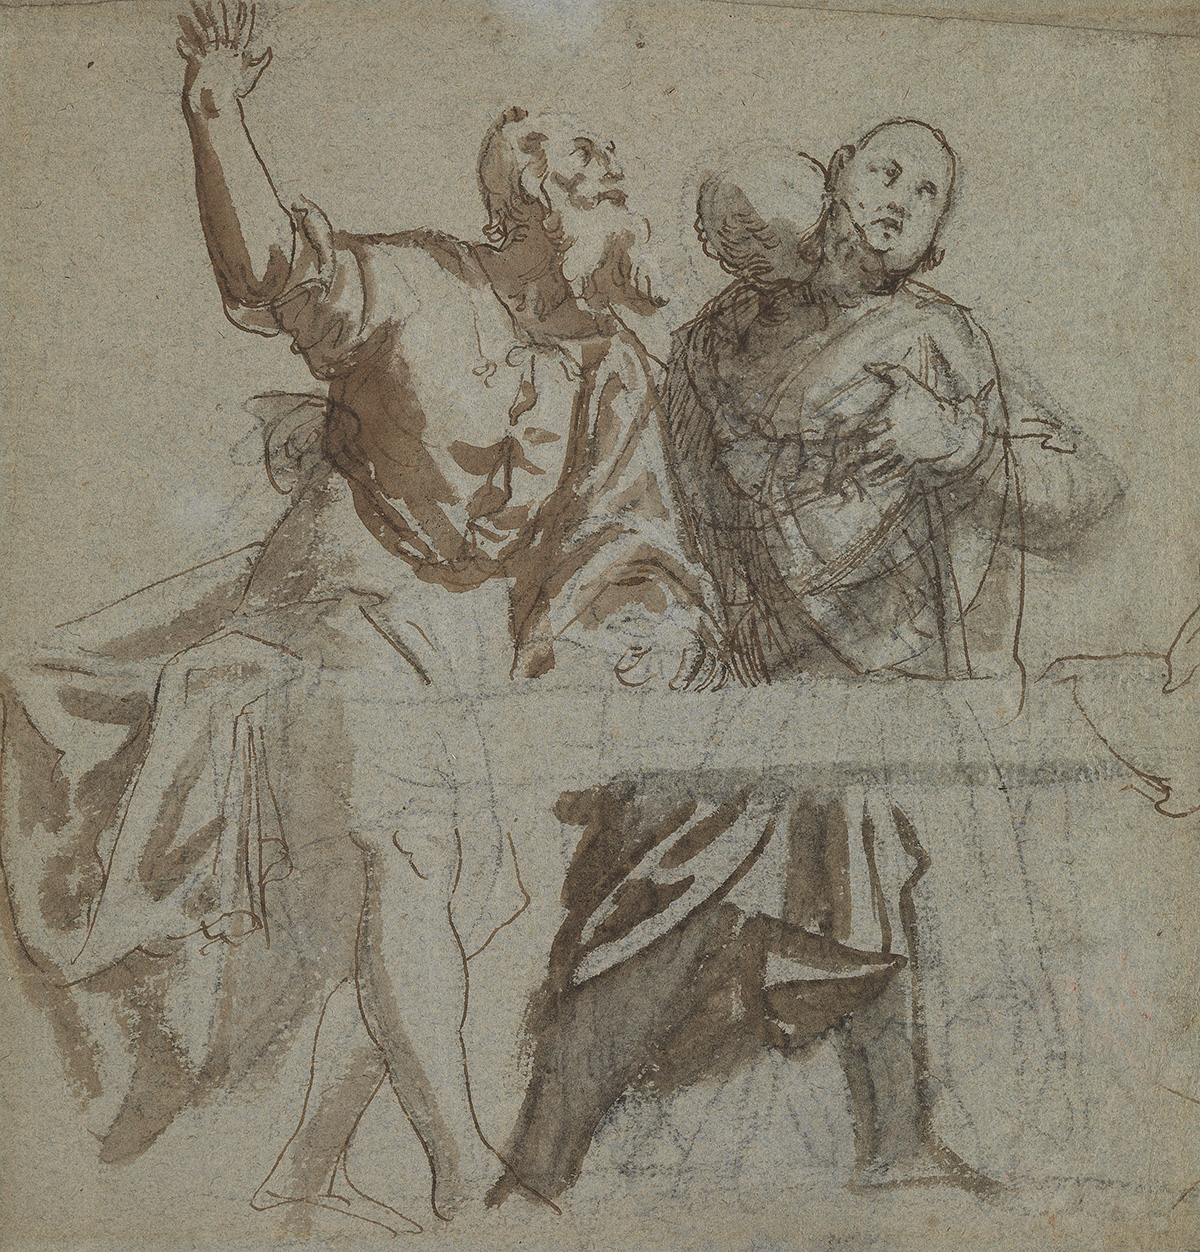 PAOLO VERONESE (CIRCLE OF) (Verona 1528-1588 Venice) A Study of Two Apostles Seated at a Table.